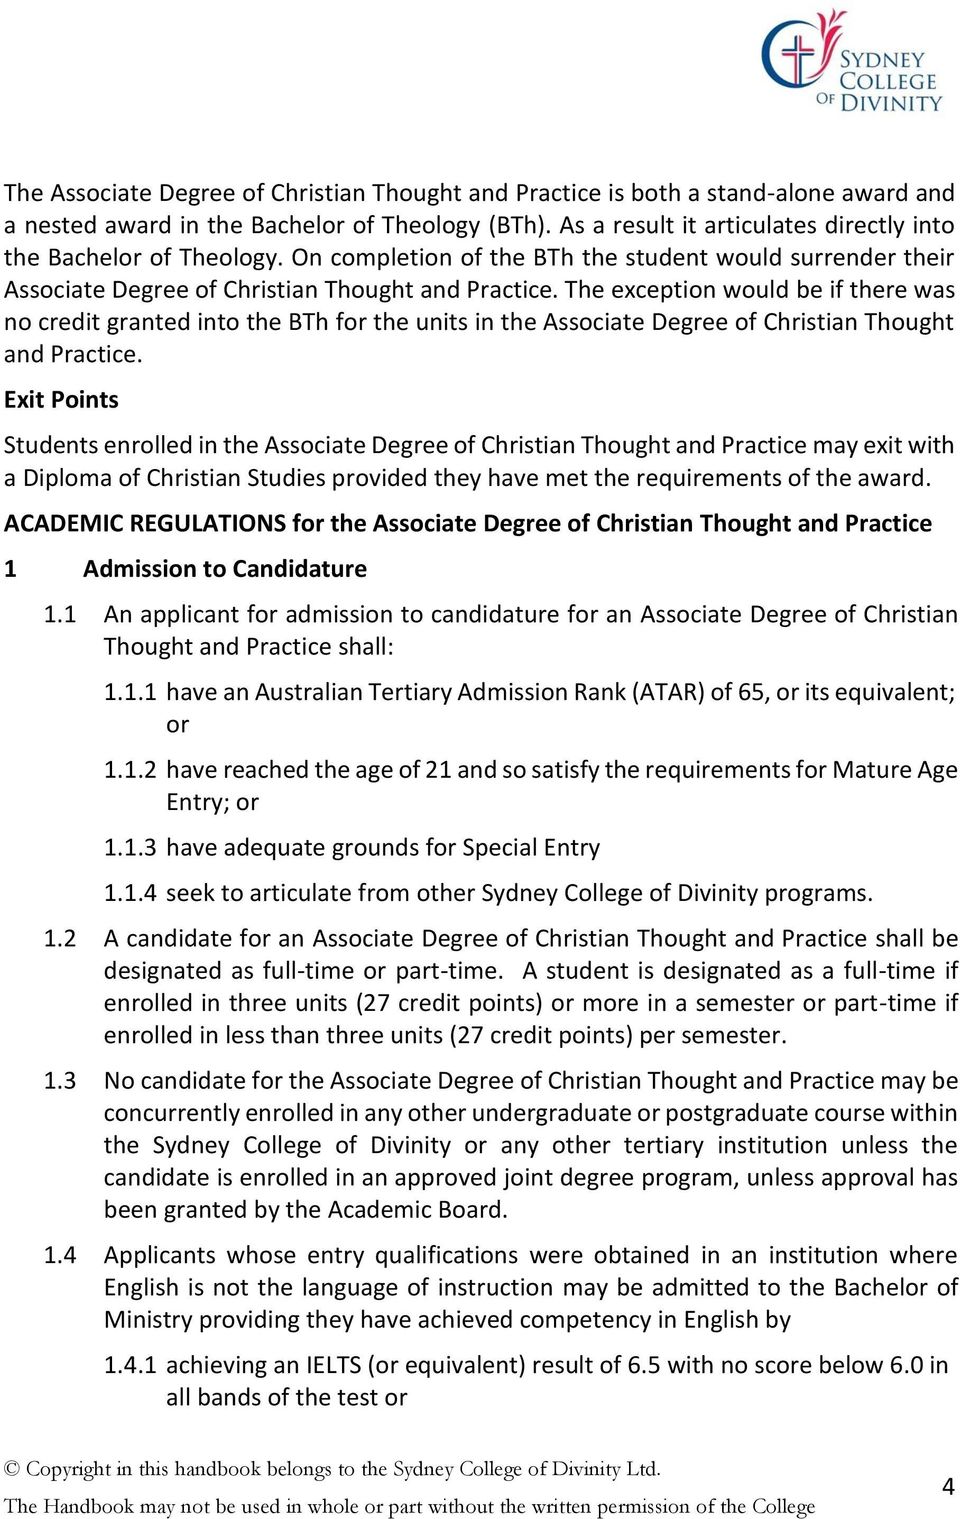 The exception would be if there was no credit granted into the BTh for the units in the Associate Degree of Christian Thought and Practice.